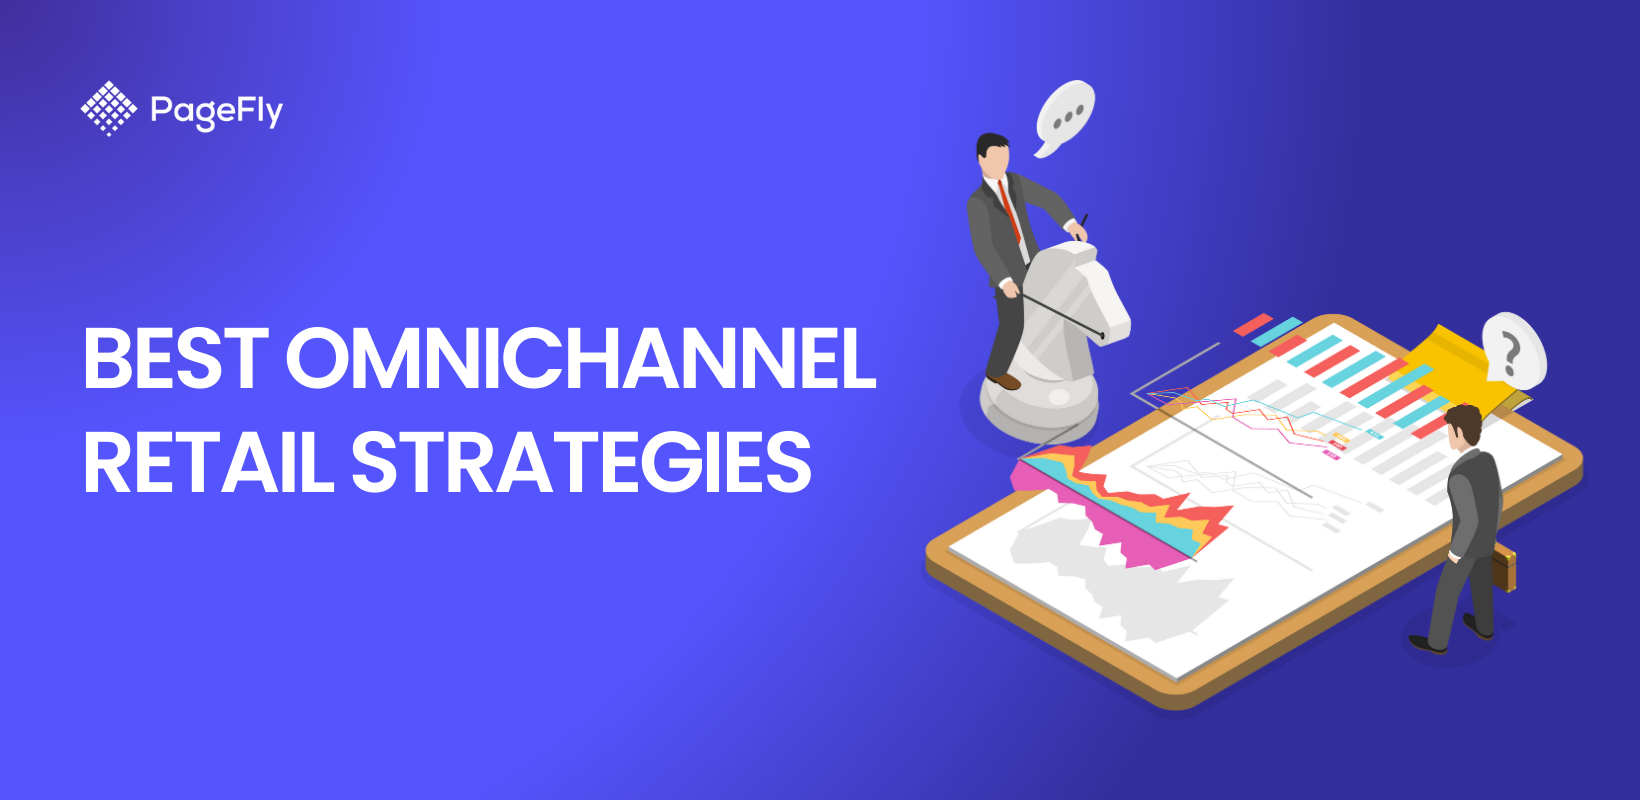 10 Best Omnichannel Retail Strategies with Examples